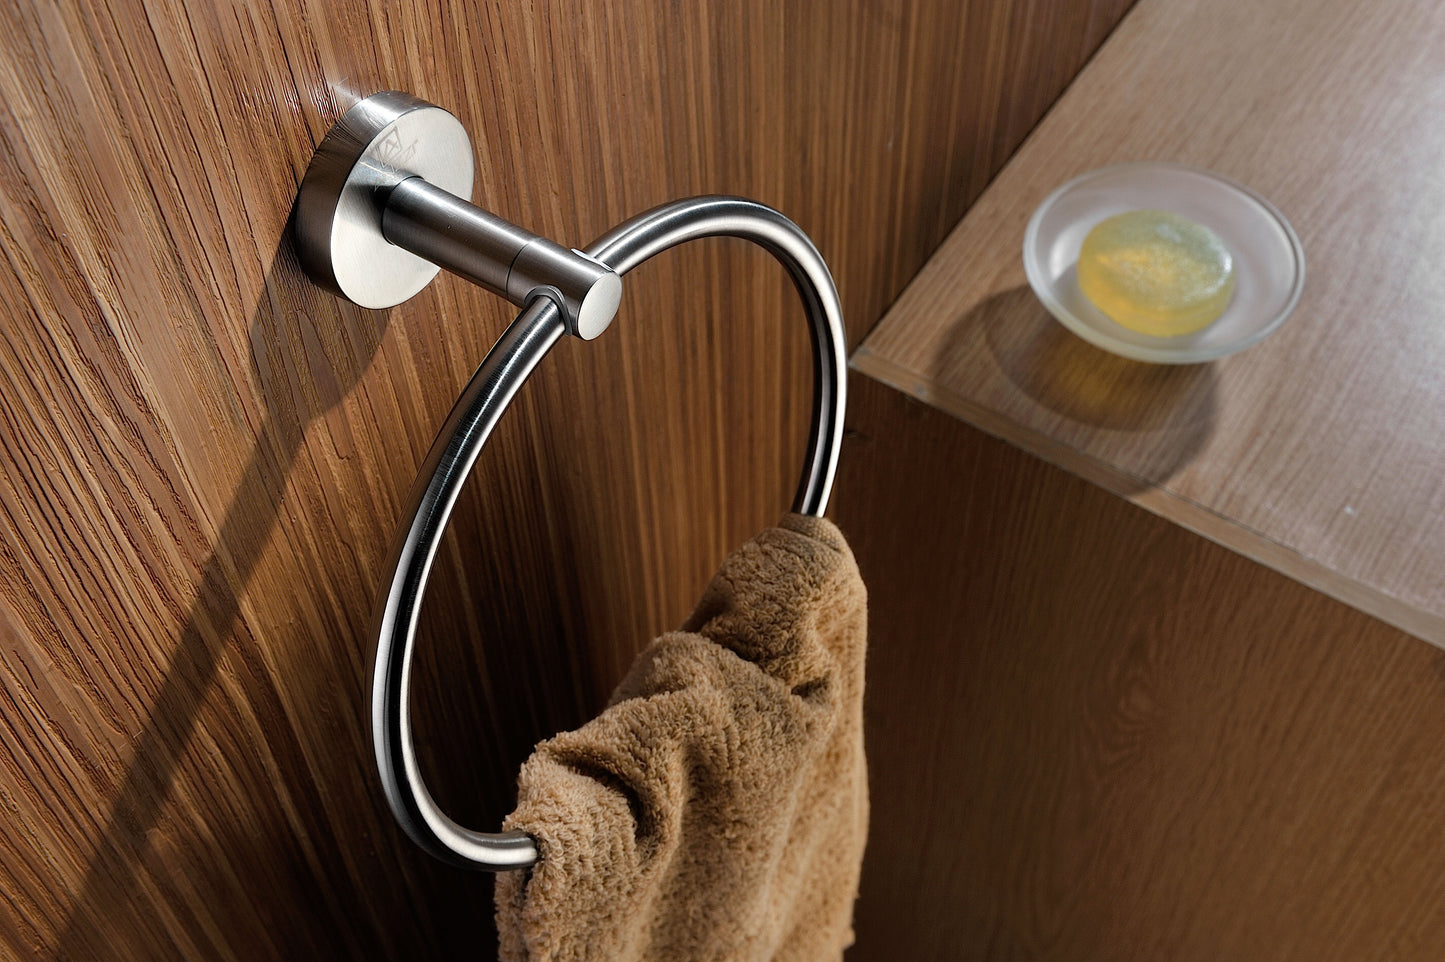 Caster Series Towel Ring